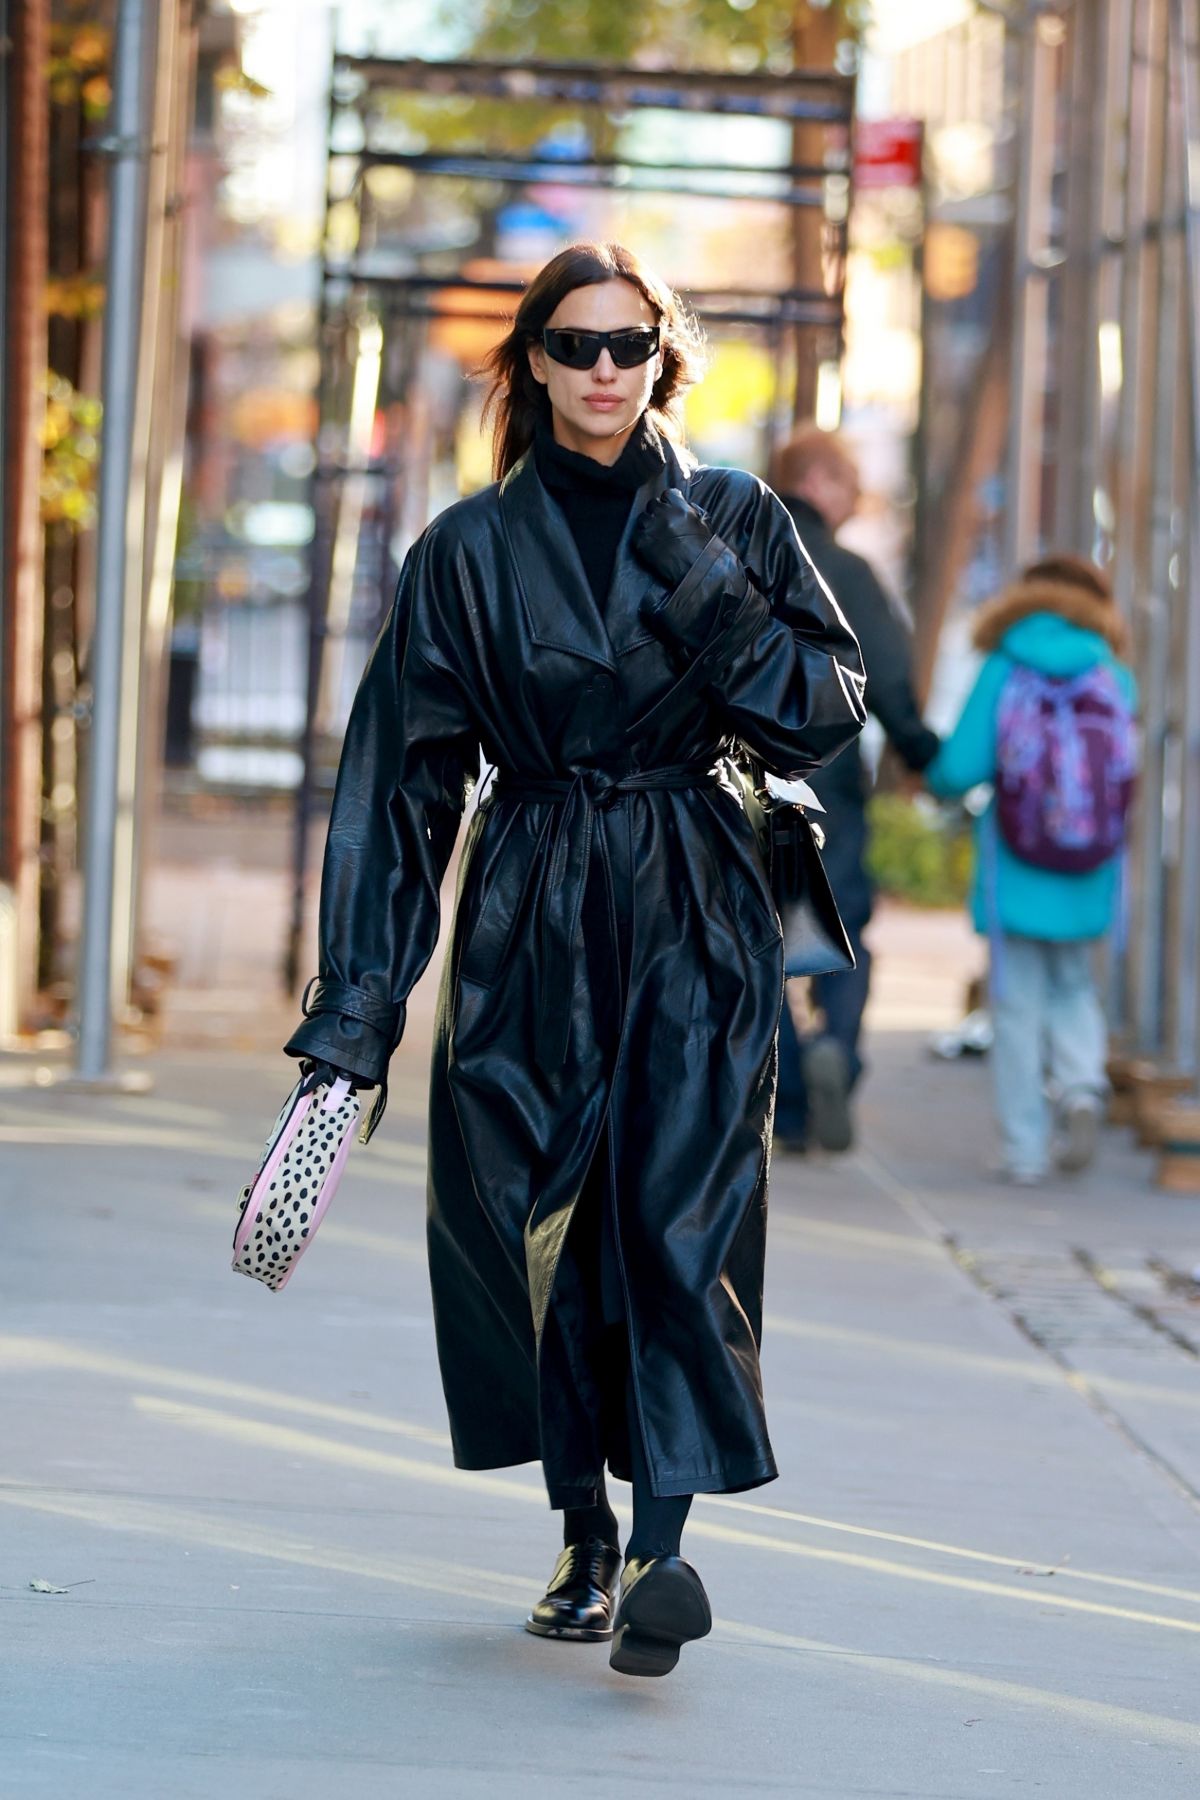 IRINA SHAYK in a Black Leather Coat Out in New York 11/14/2022 – HawtCelebs